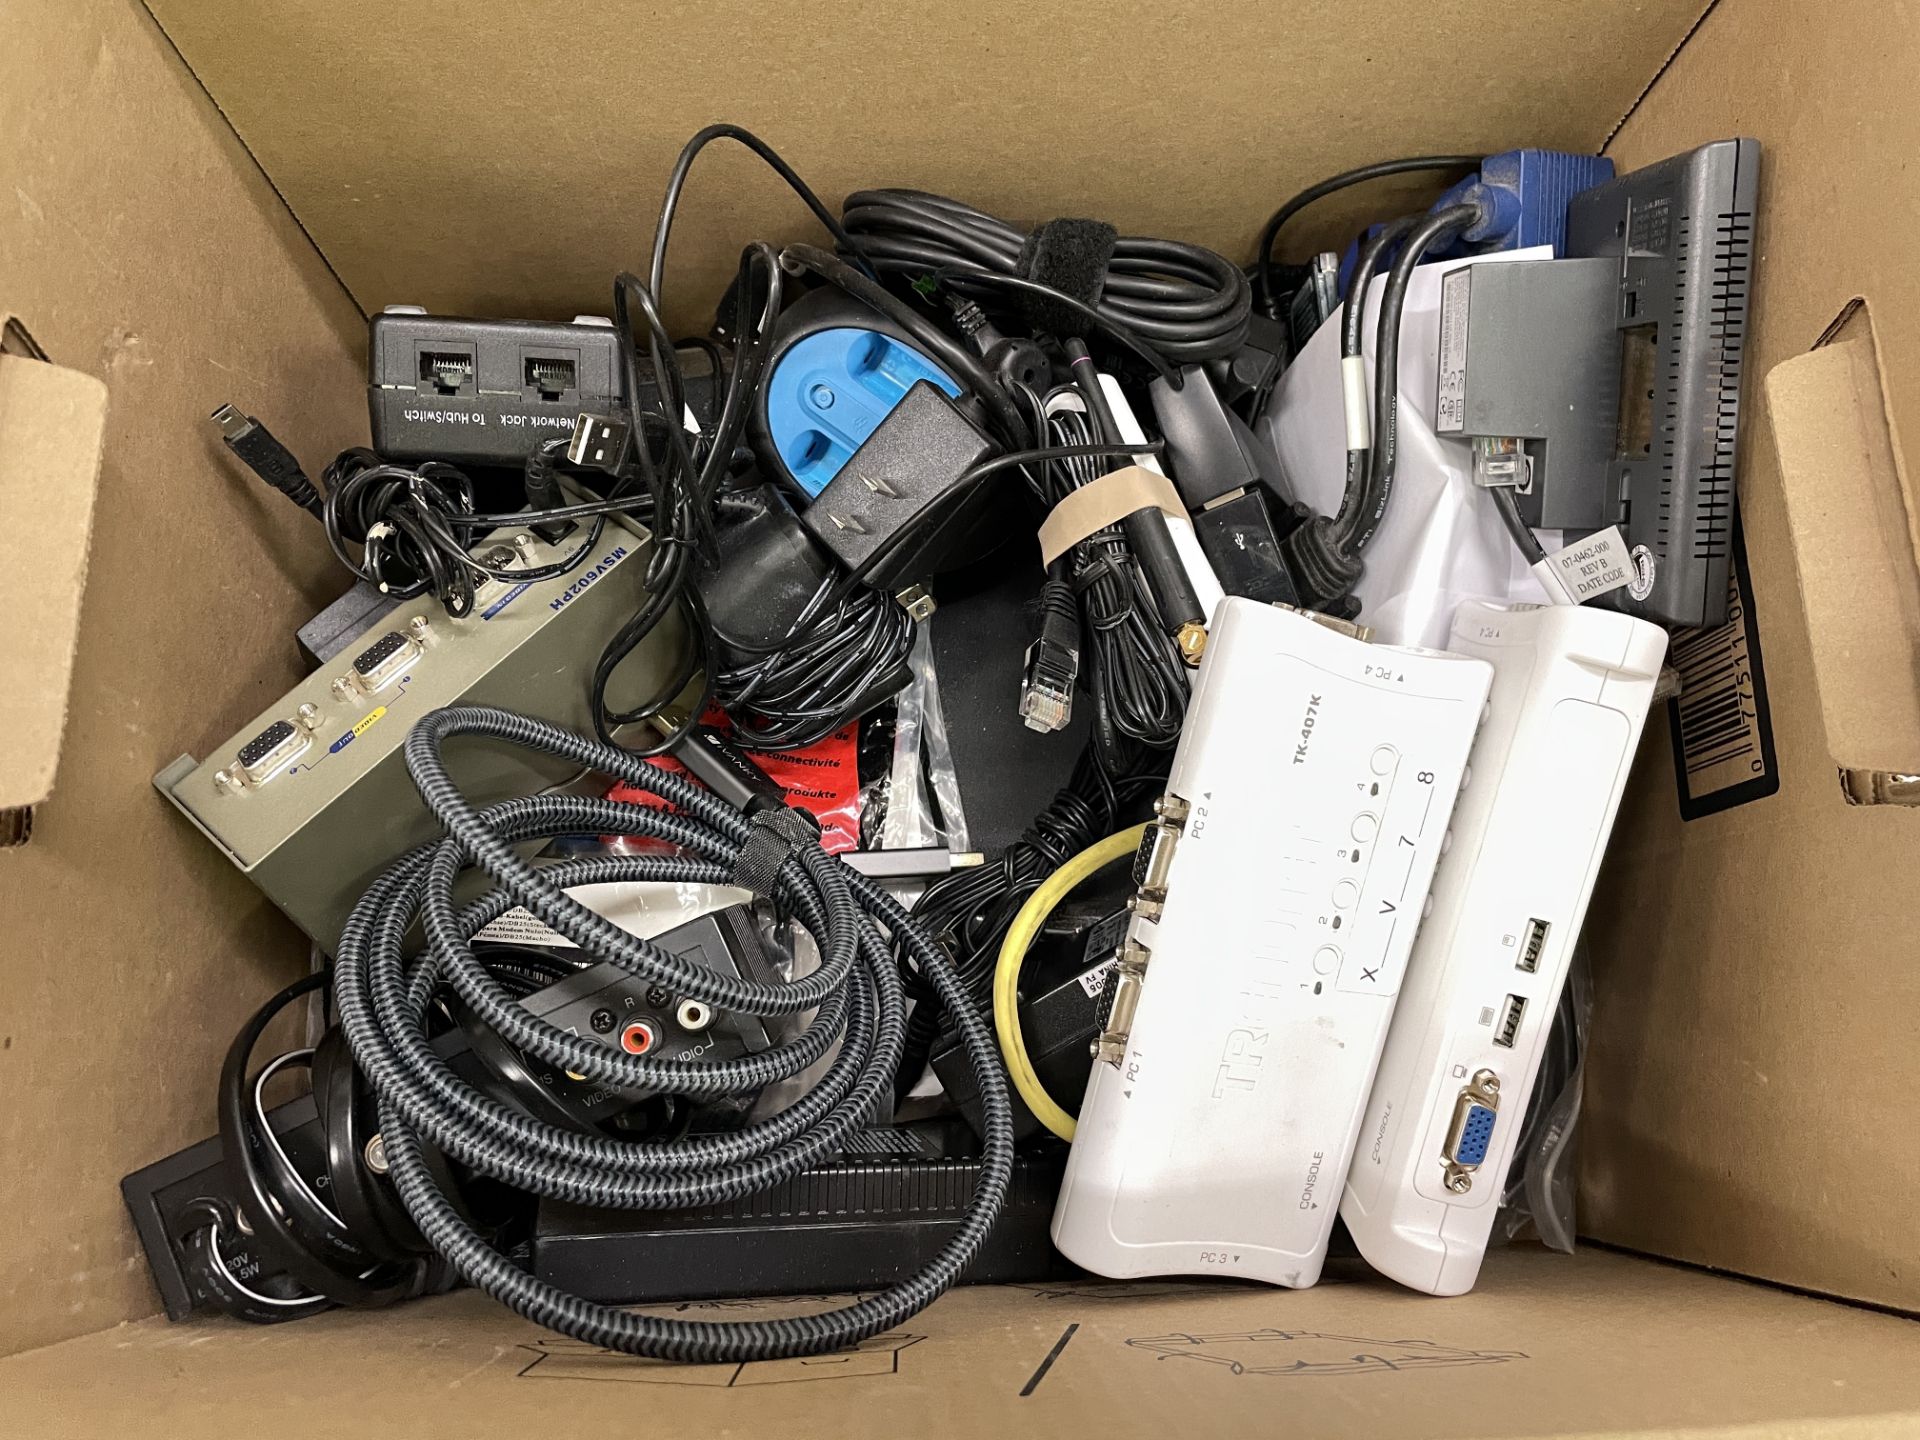 LG Phone, Cisco and Jupiter Networking equipment, Cables, small electronics mixed. - Image 6 of 6